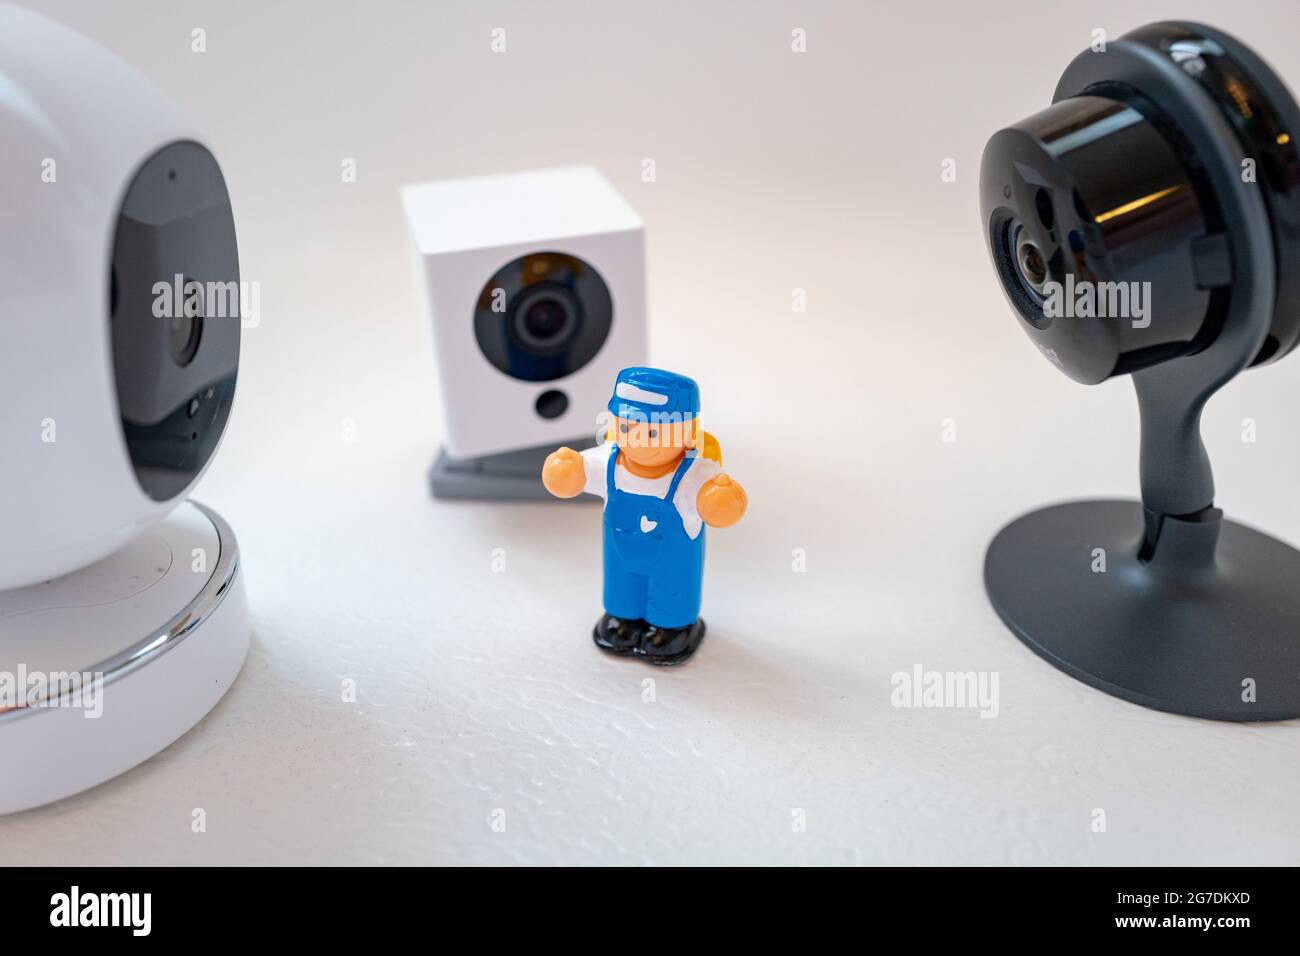 Illustrative image of a plastic child's toy person surrounded by security cameras from Google Nest, Simcam, and Wyze on a white background, suggesting mass surveillance, in San Ramon, California, November 20, 2020. () Stock Photo